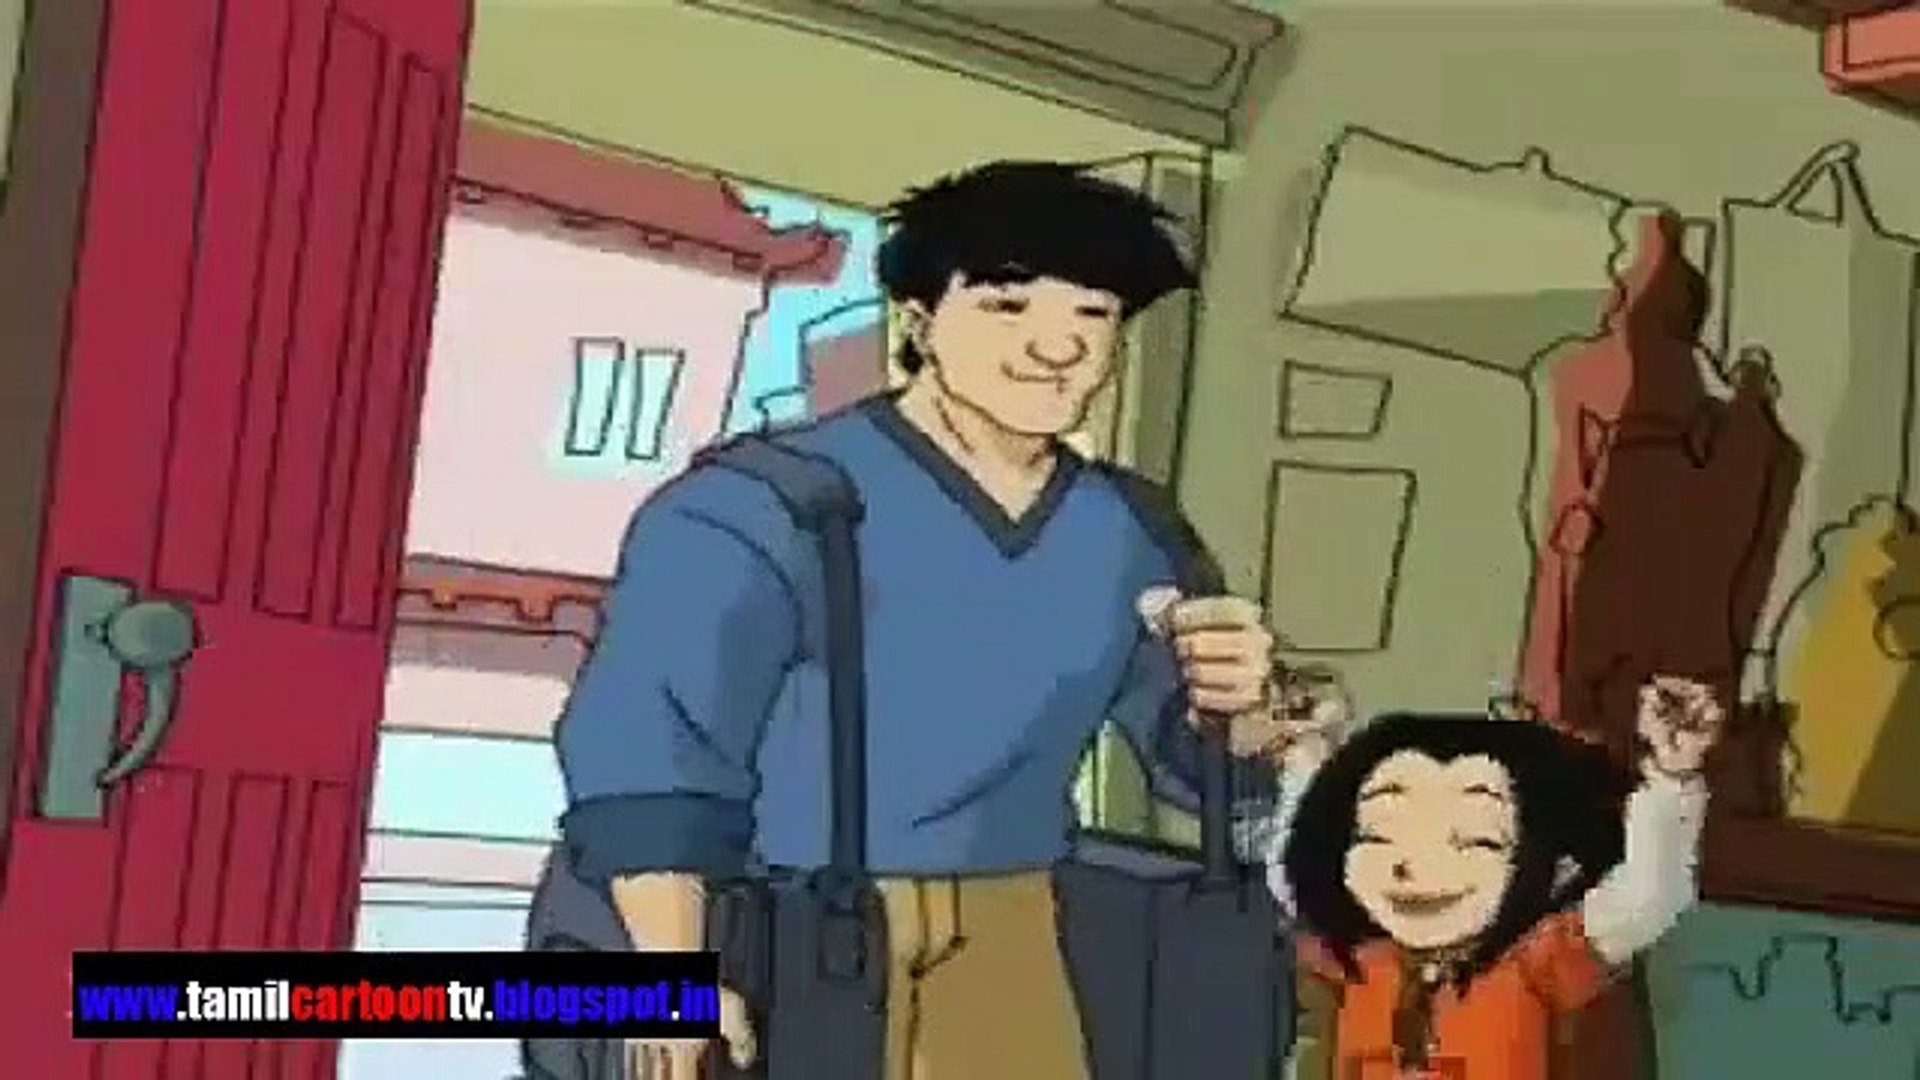 Adventures of jackie chan in tamil-Jackie chan in tamil-Jackie Chan  Adventure in tamil -Season 1-Episode 6 - Project A, for Astral - video  Dailymotion